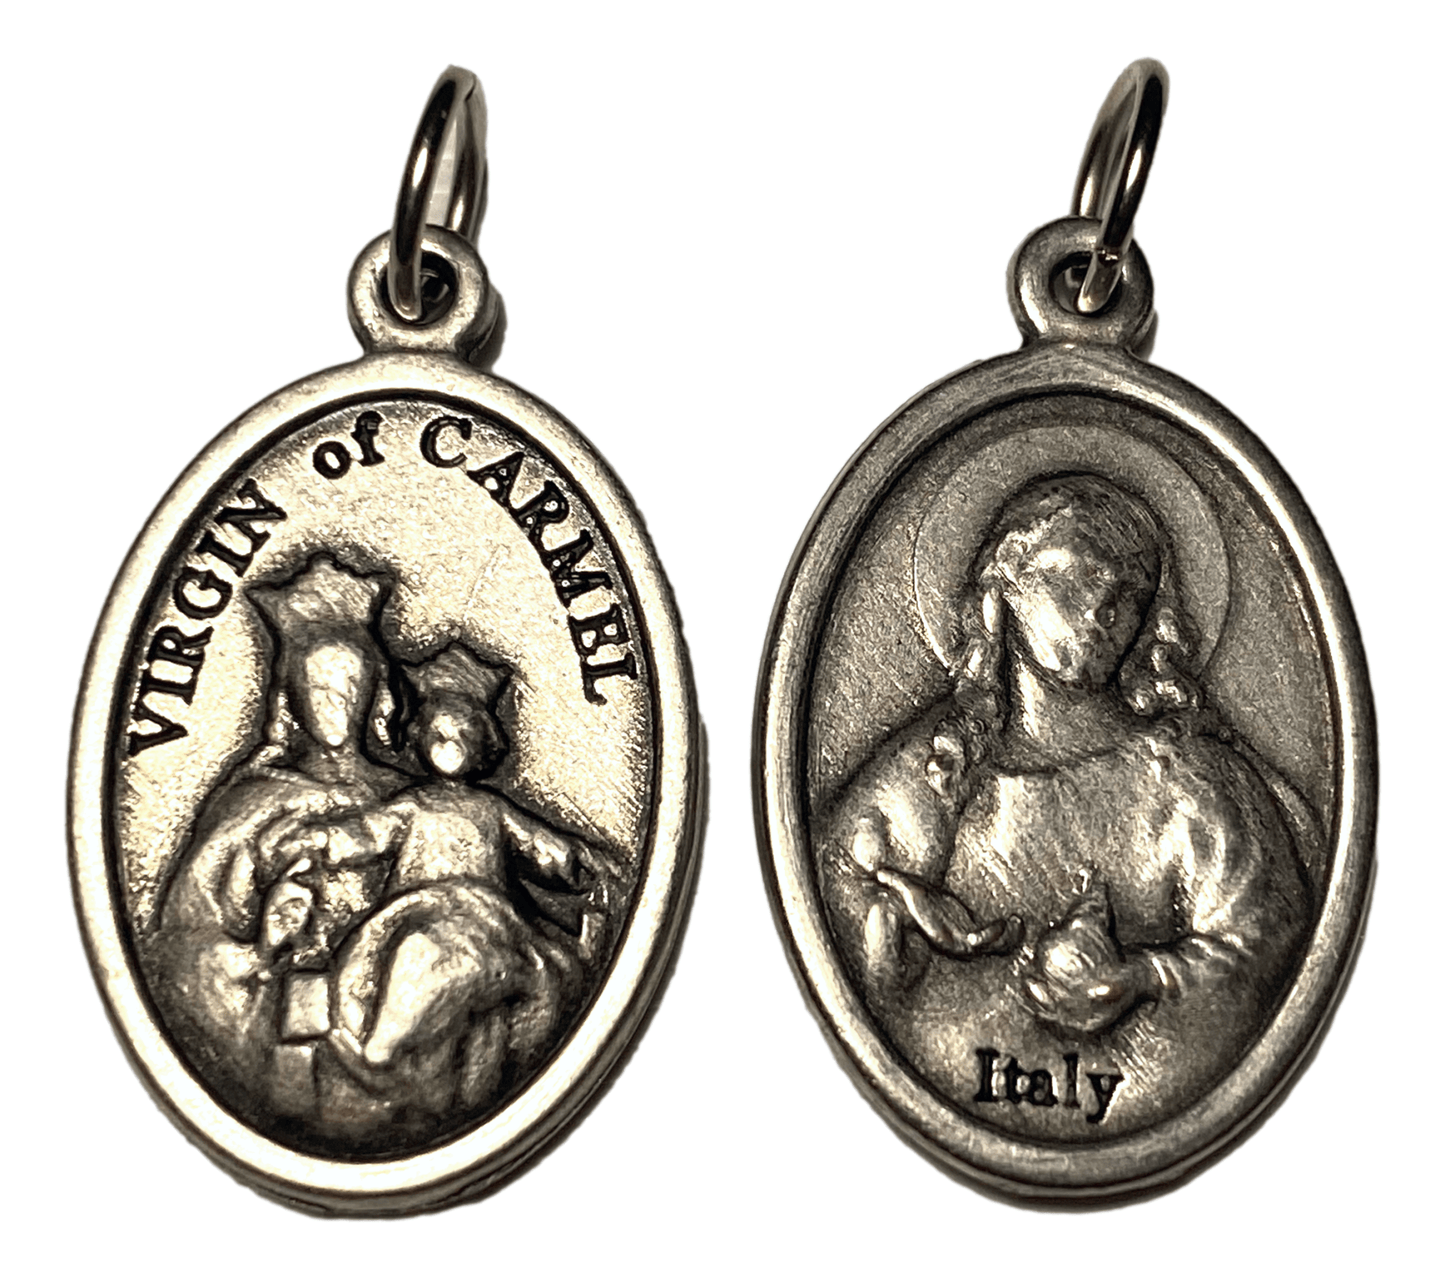 Medal Oval Sacred Heart Virgin of Carmel Italian Double-Sided Silver Metal Alloy 1 L x 5/8 W inches - Ysleta Mission Gift Shop- VOTED El Paso's Best Gift Shop